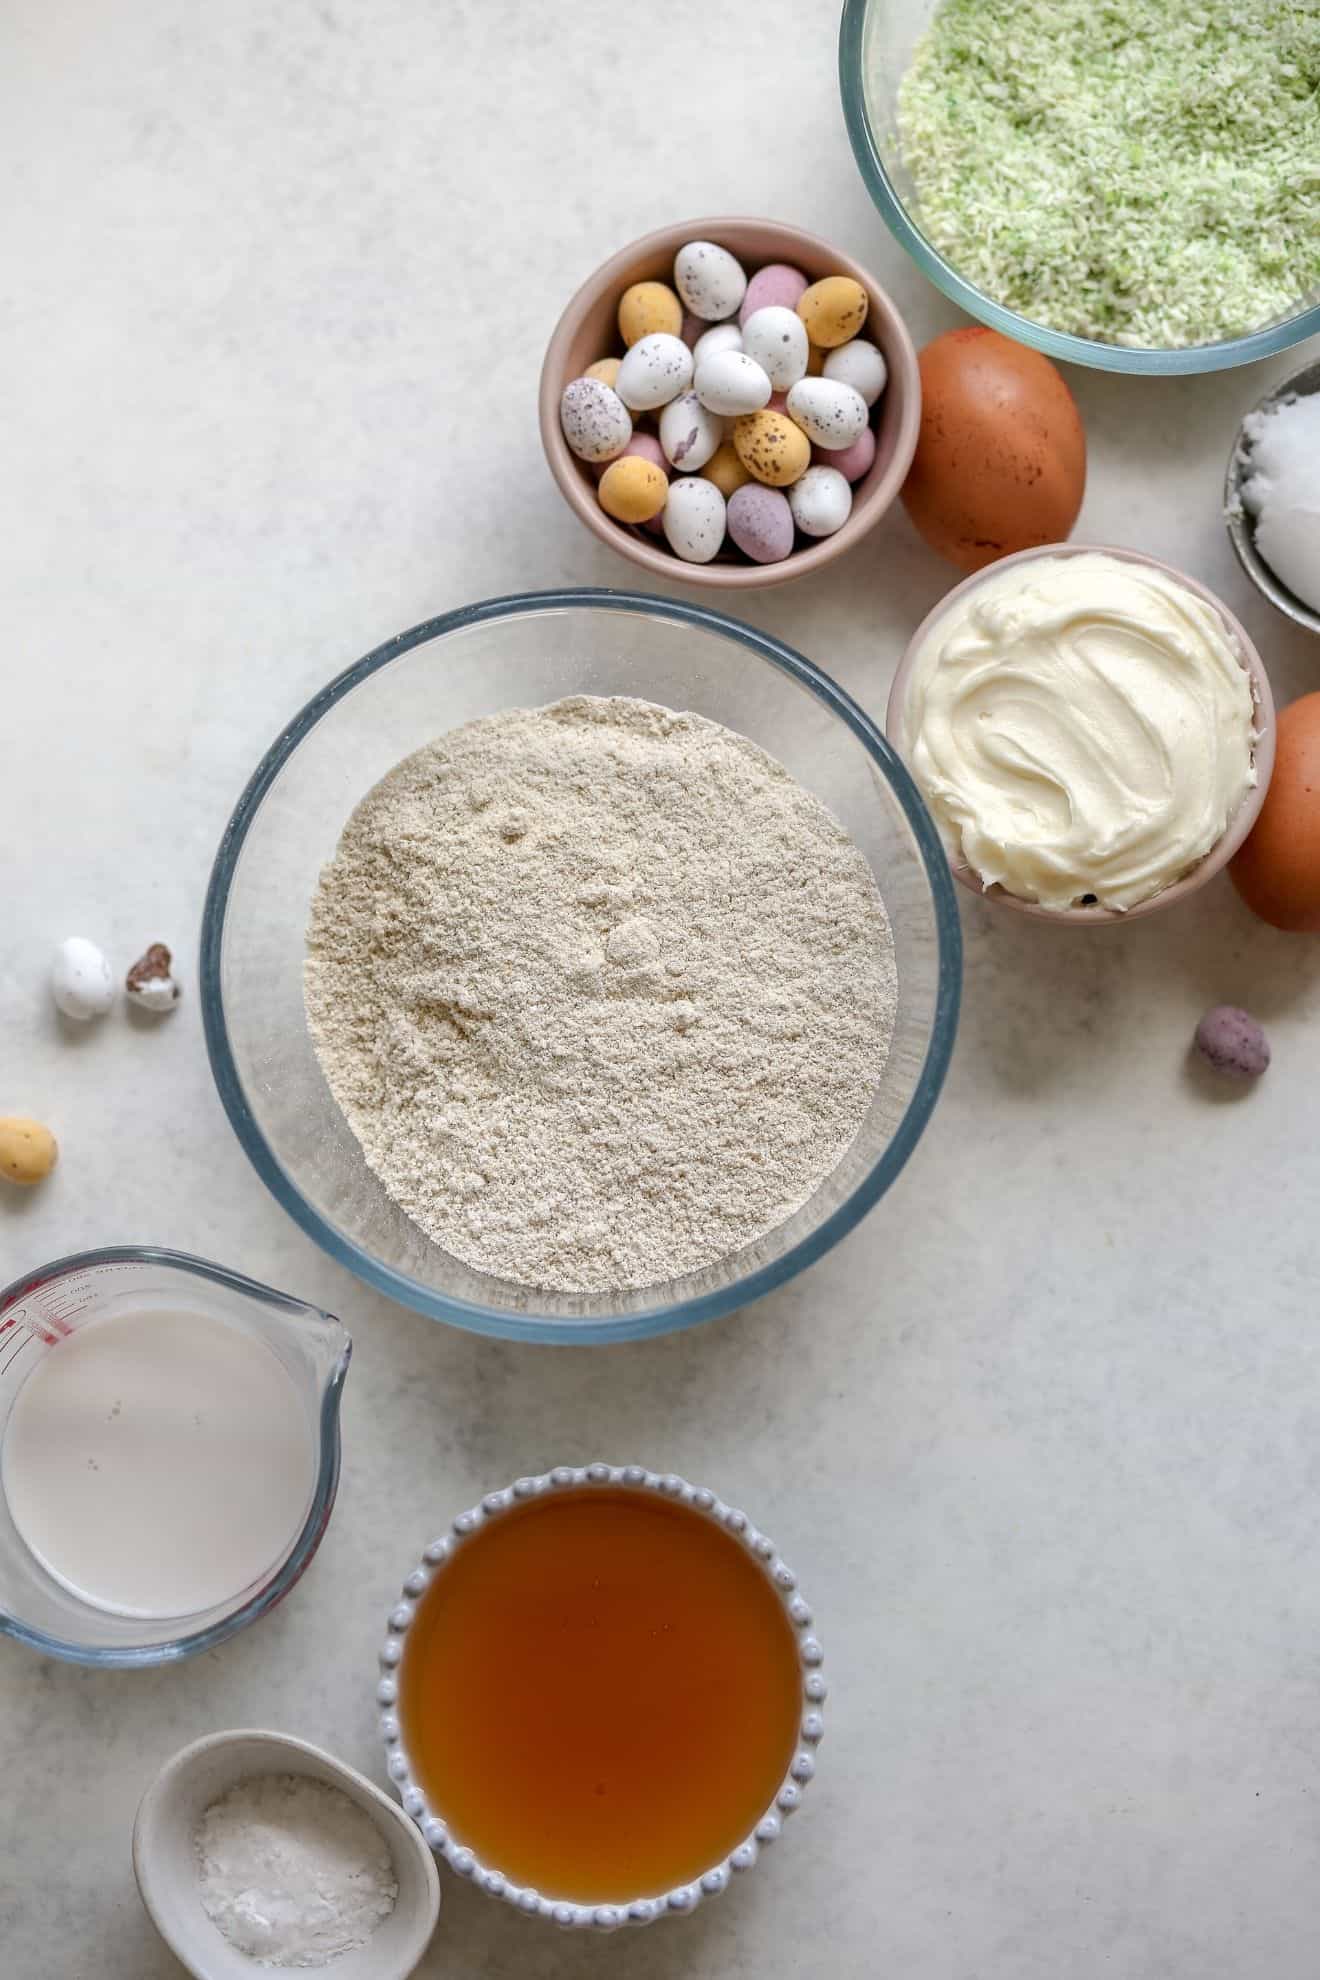 This is an overhead image of ingredients to make vanilla cupcakes with mini easter candy eggs on top. The ingredients are on a white surface.